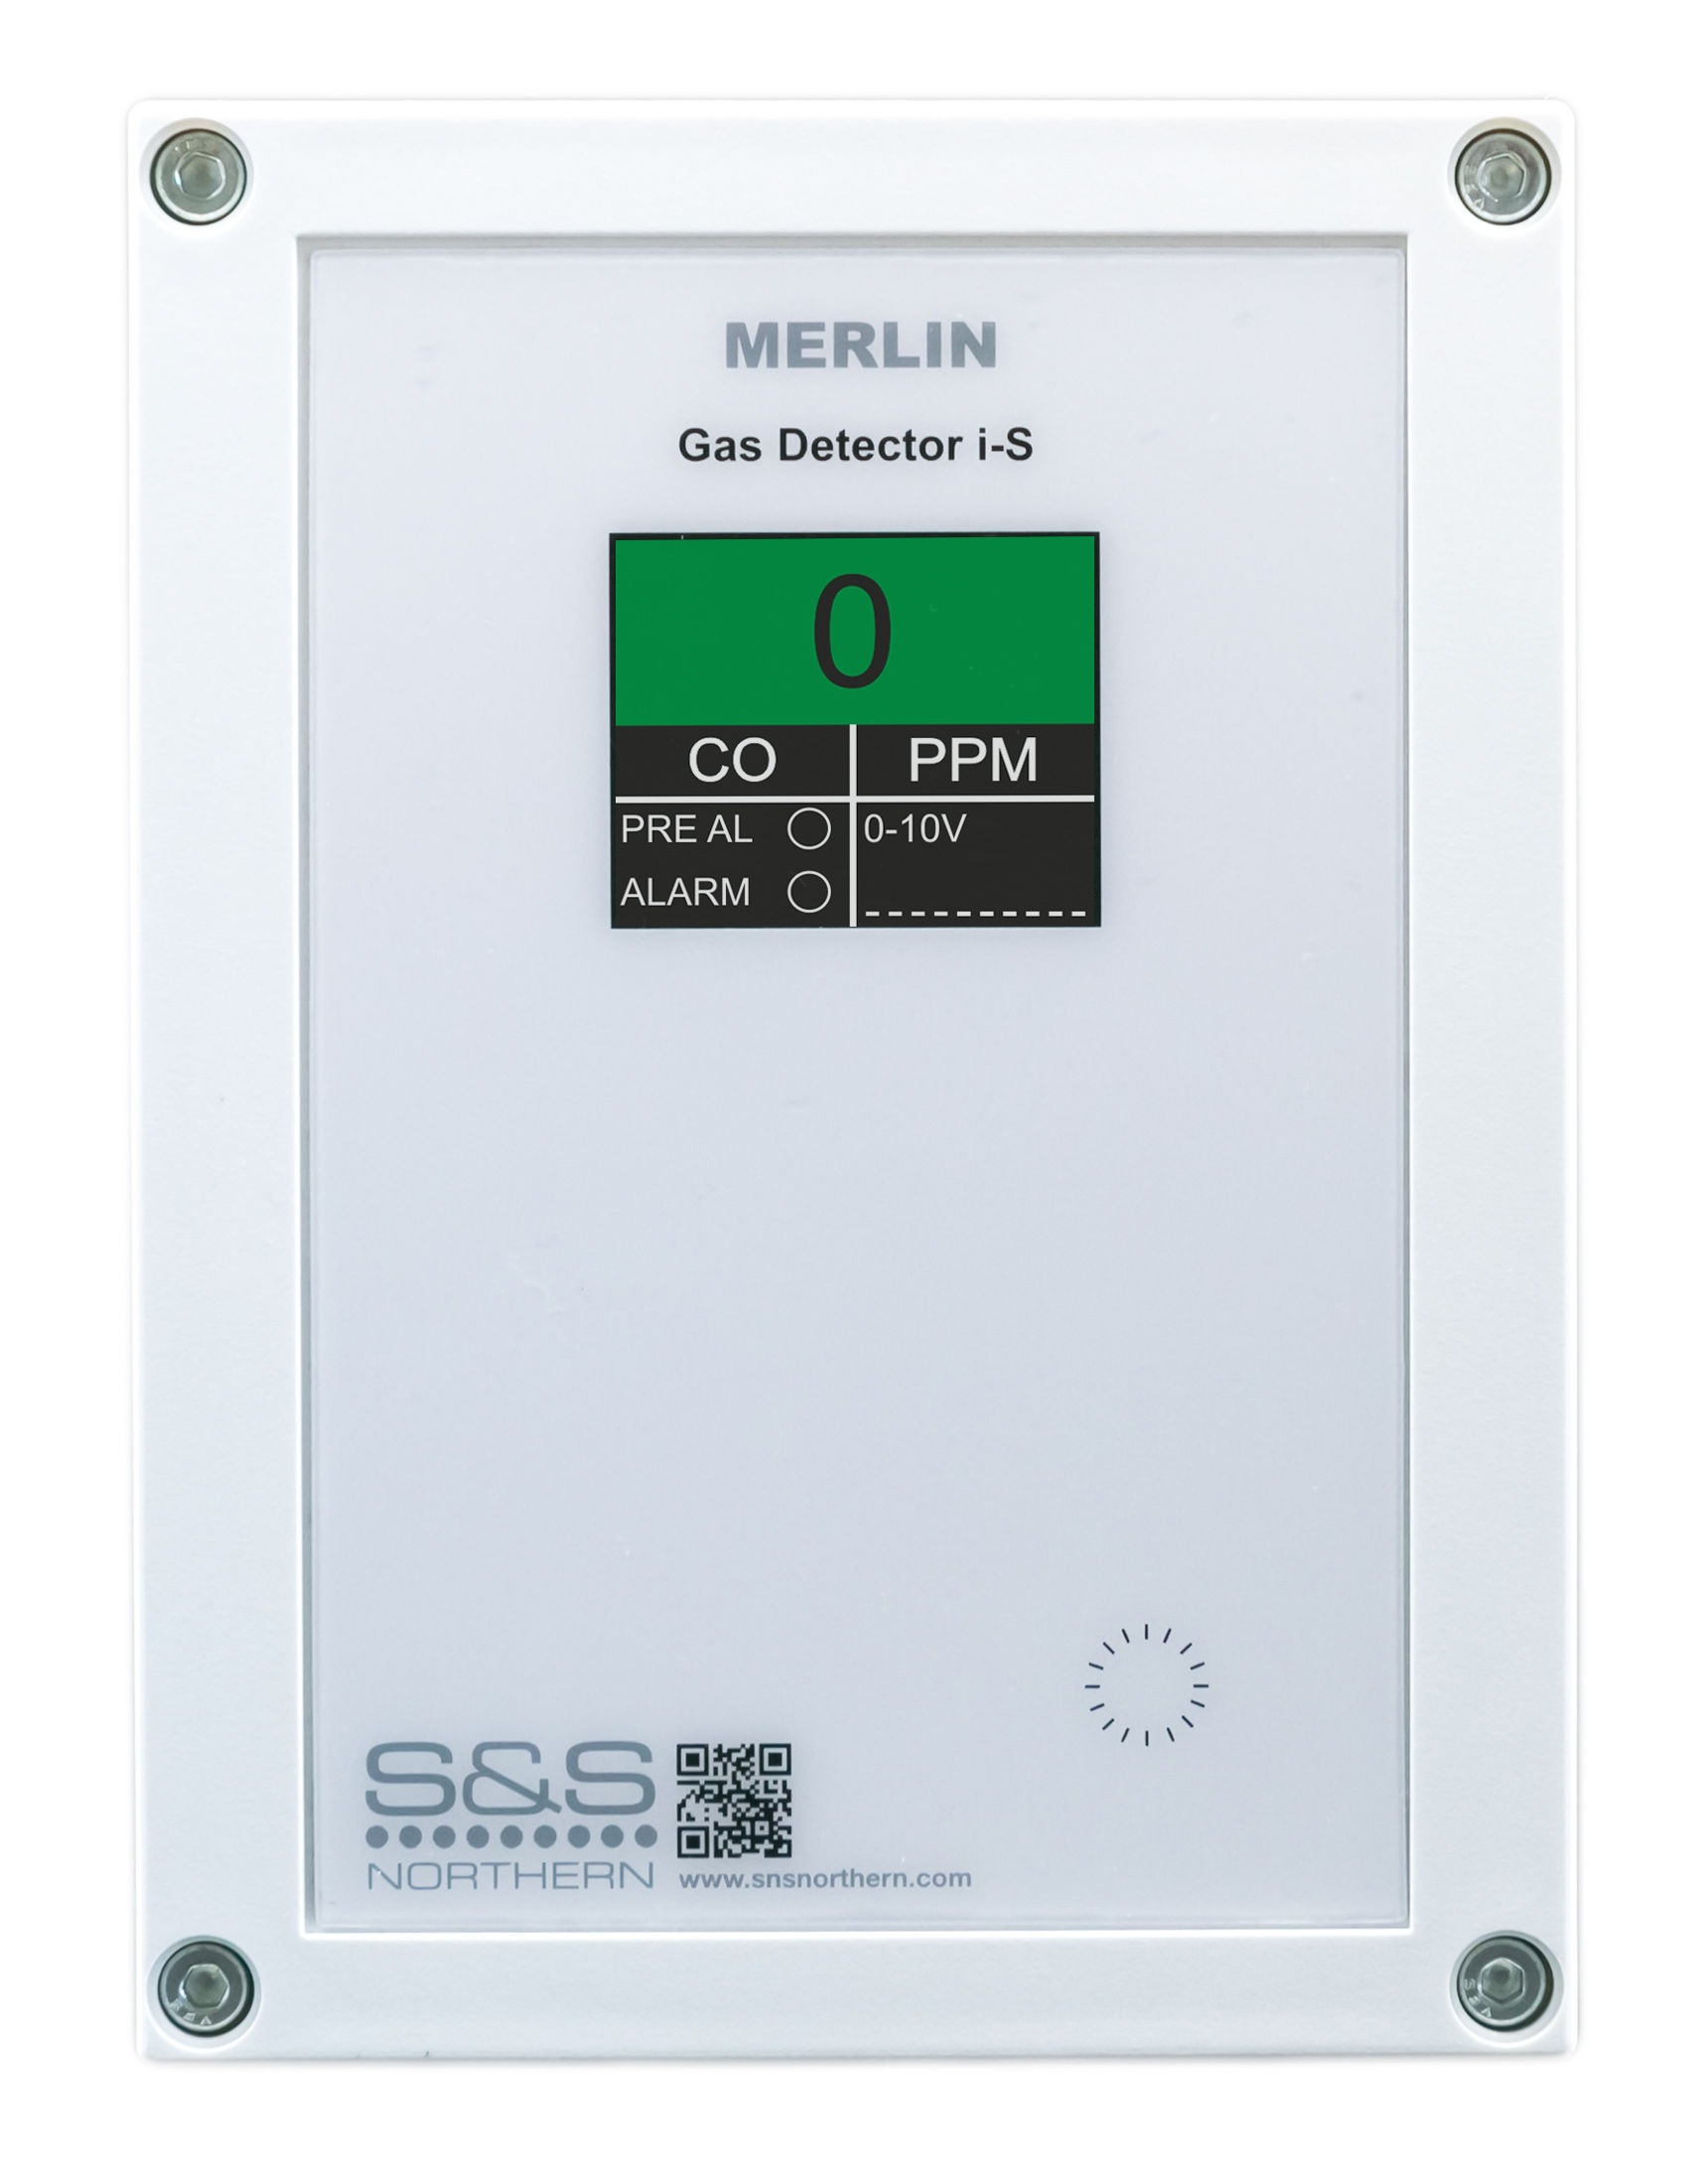 Merlin Gas Detector iS - S&S Northern - Gas Safety Systems, Water Leak  Detection & Gas Detection